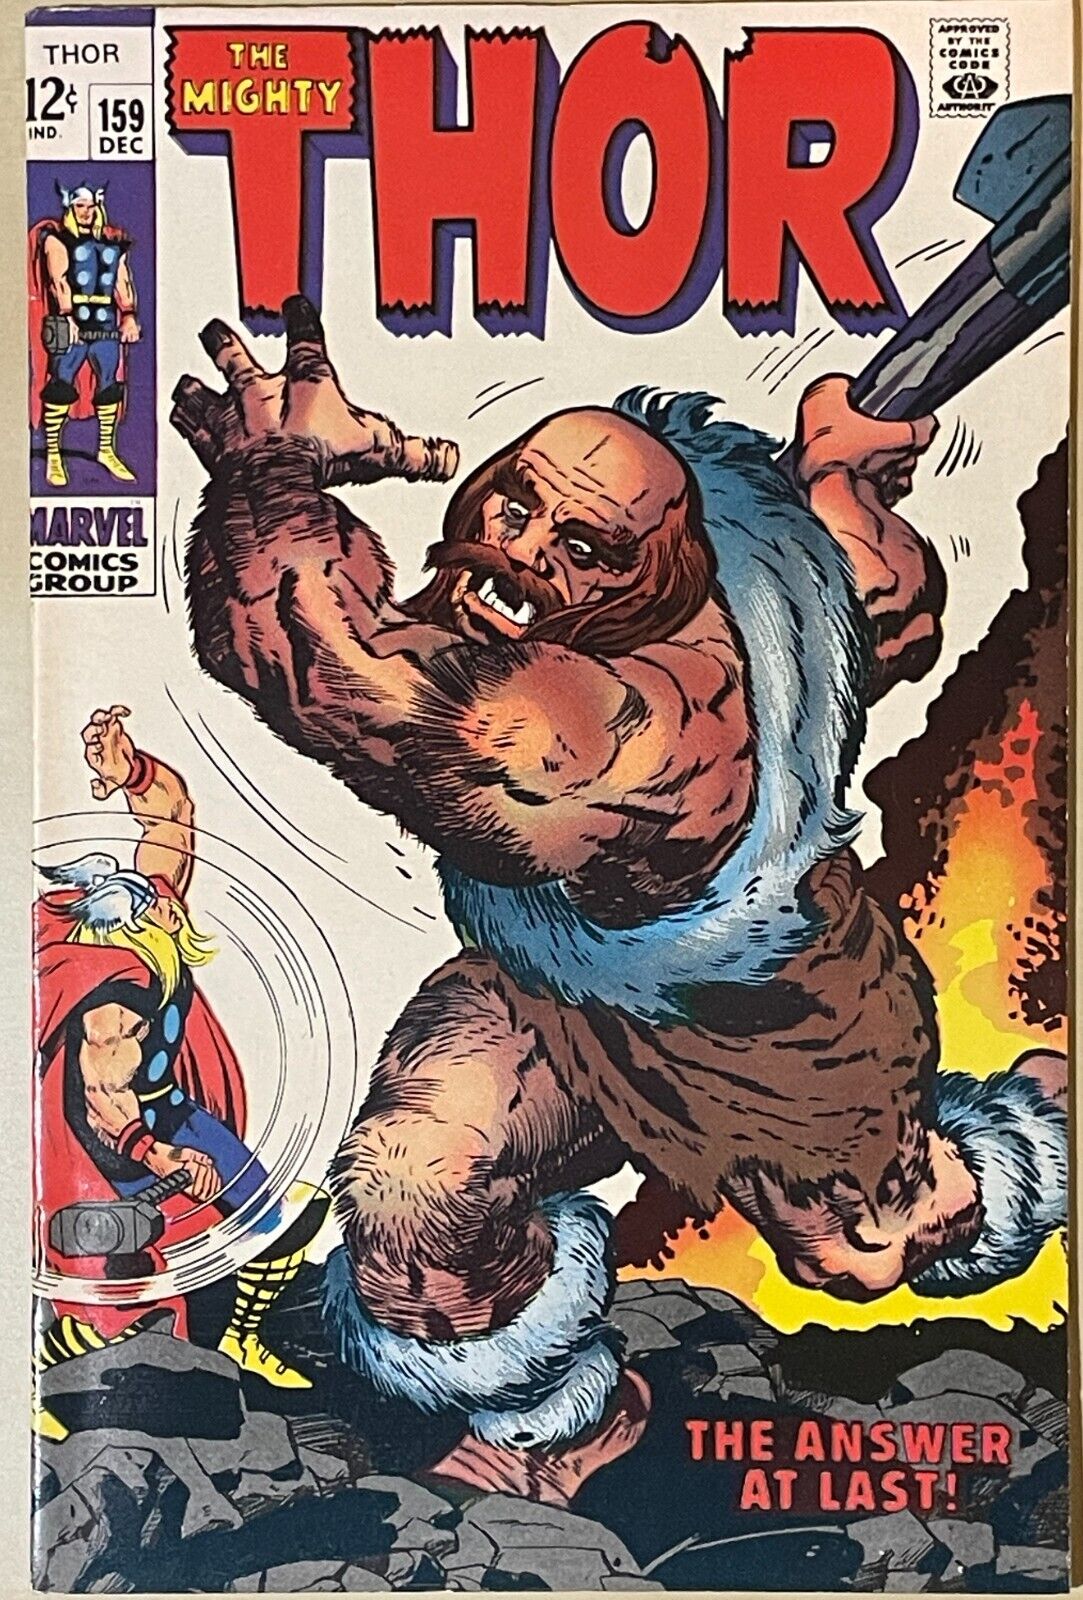 THOR #159 (1968) VF to VF+ SILVER AGE MARVEL COMICS JACK KIRBY STAN LEE